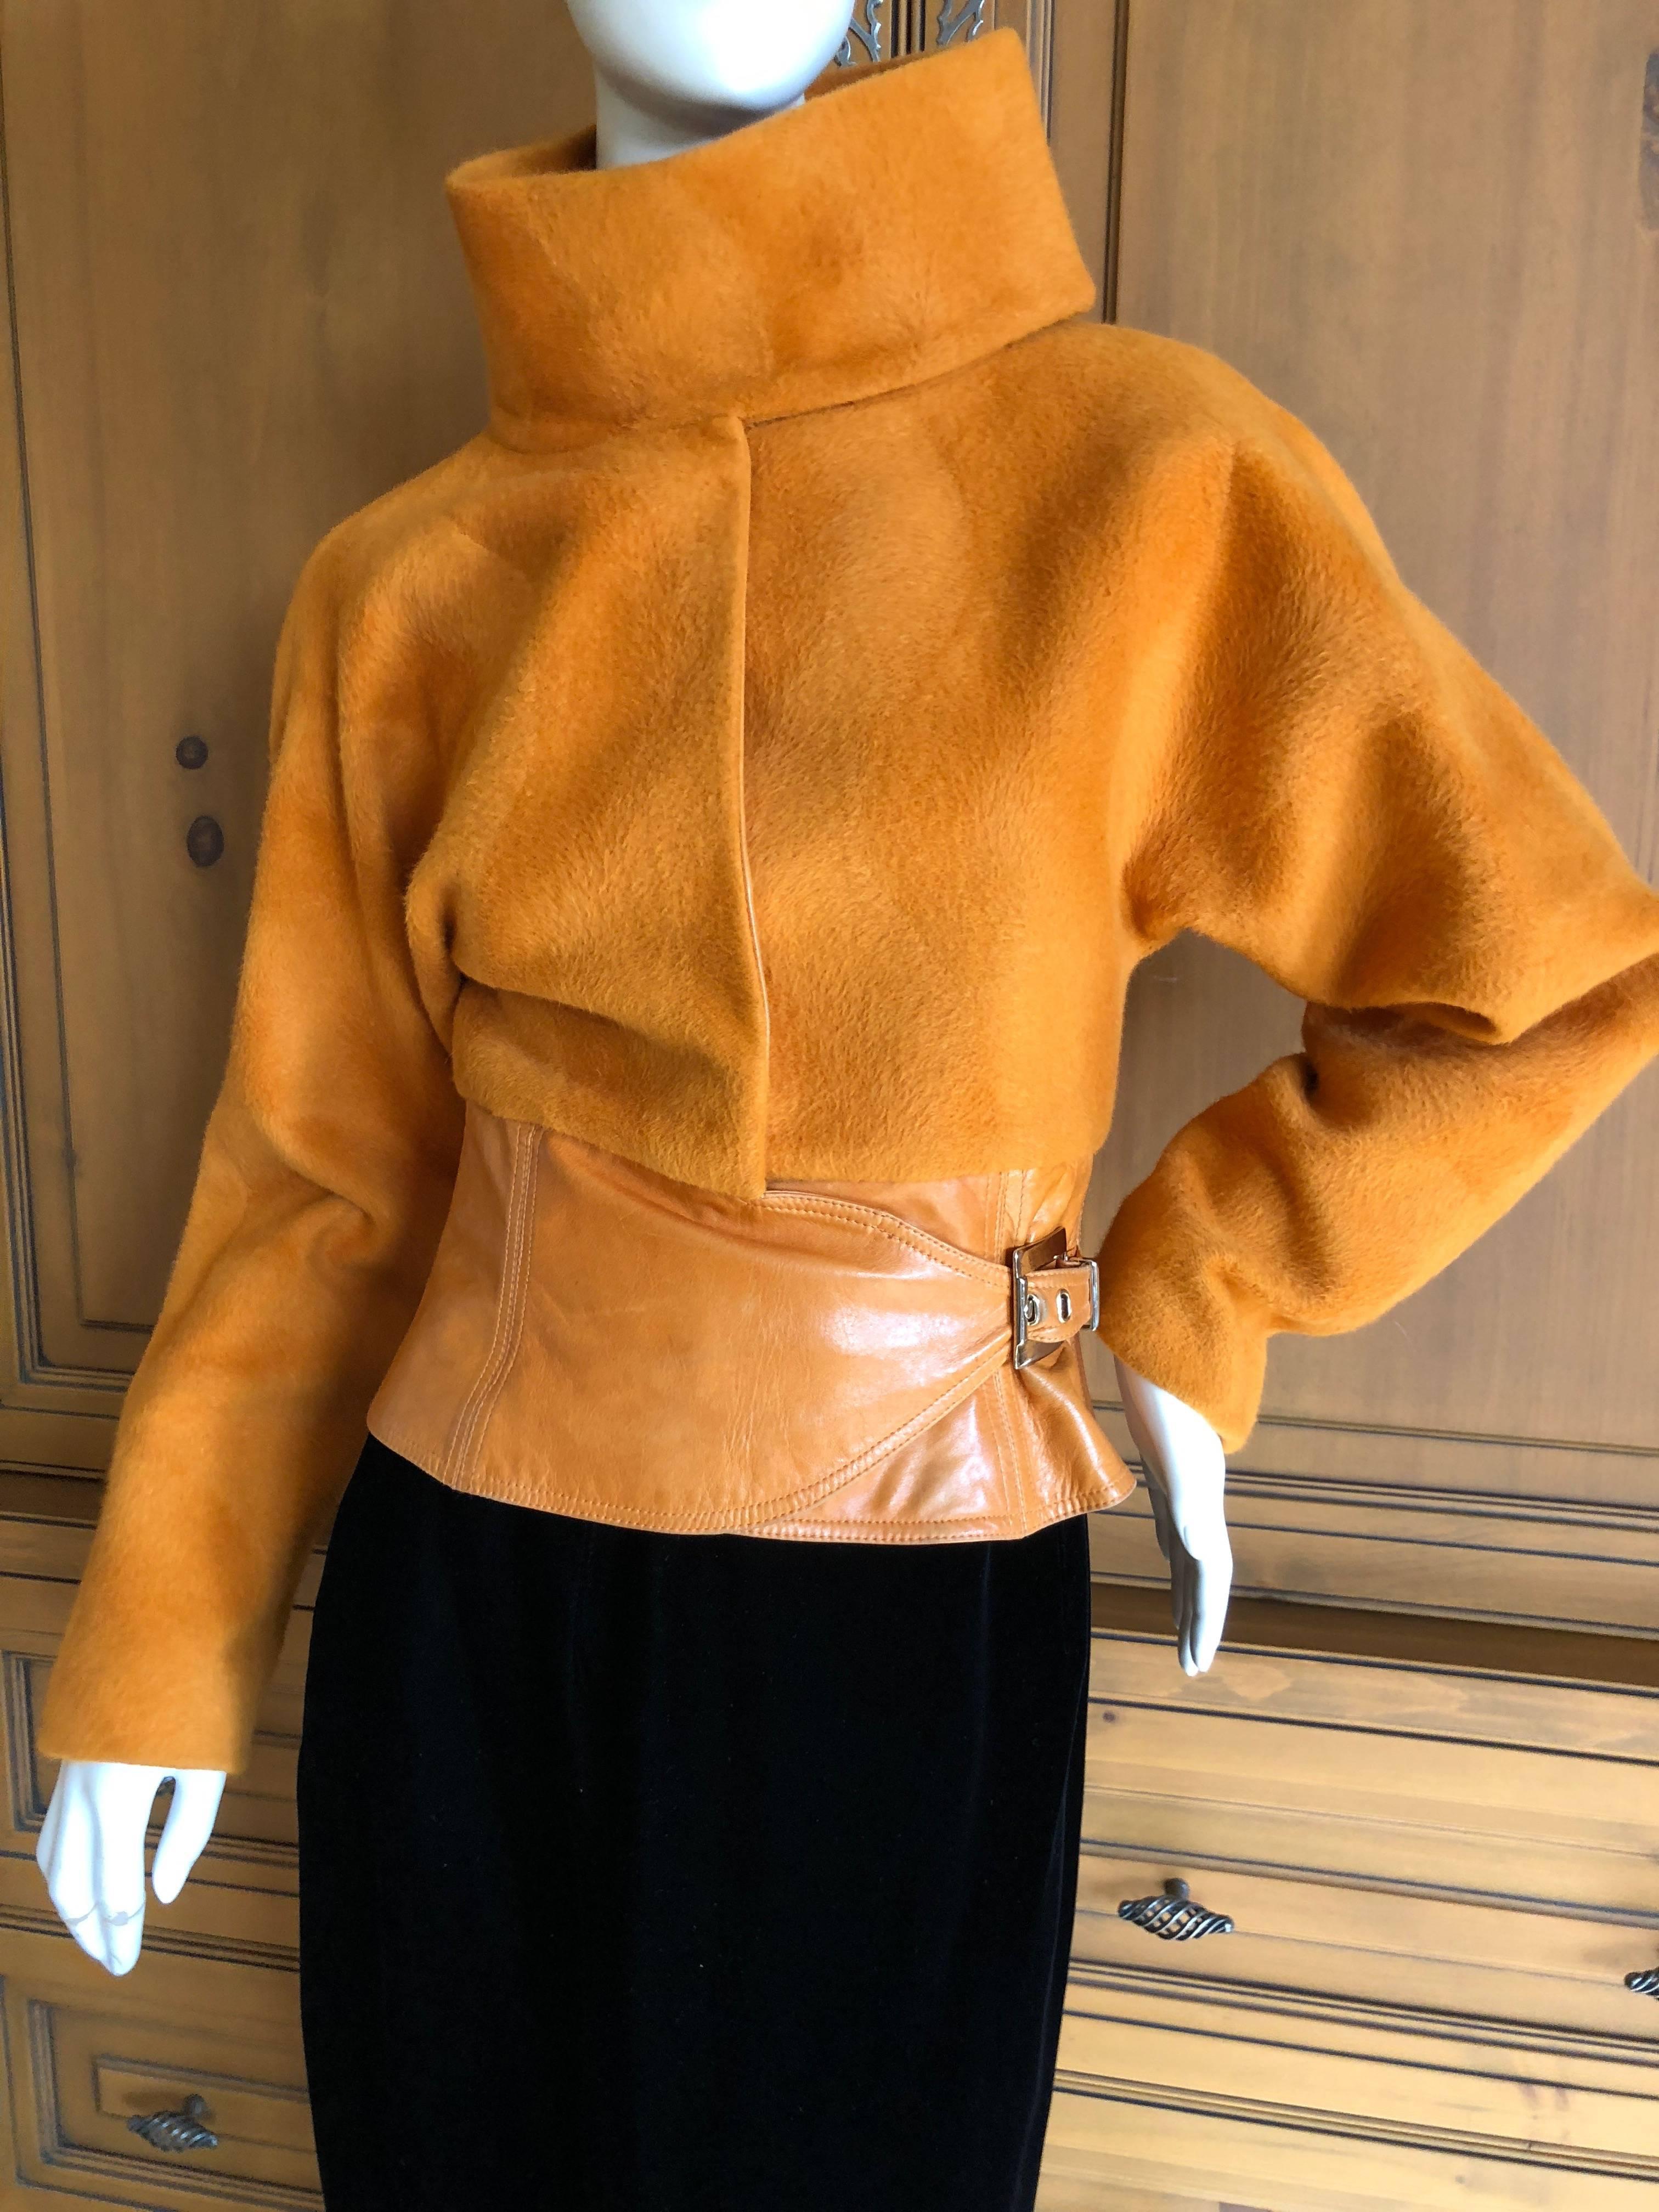 Women's Gianni Versace Couture 1980's Luxurious Orange Wrap Jacket with Leather Trim For Sale